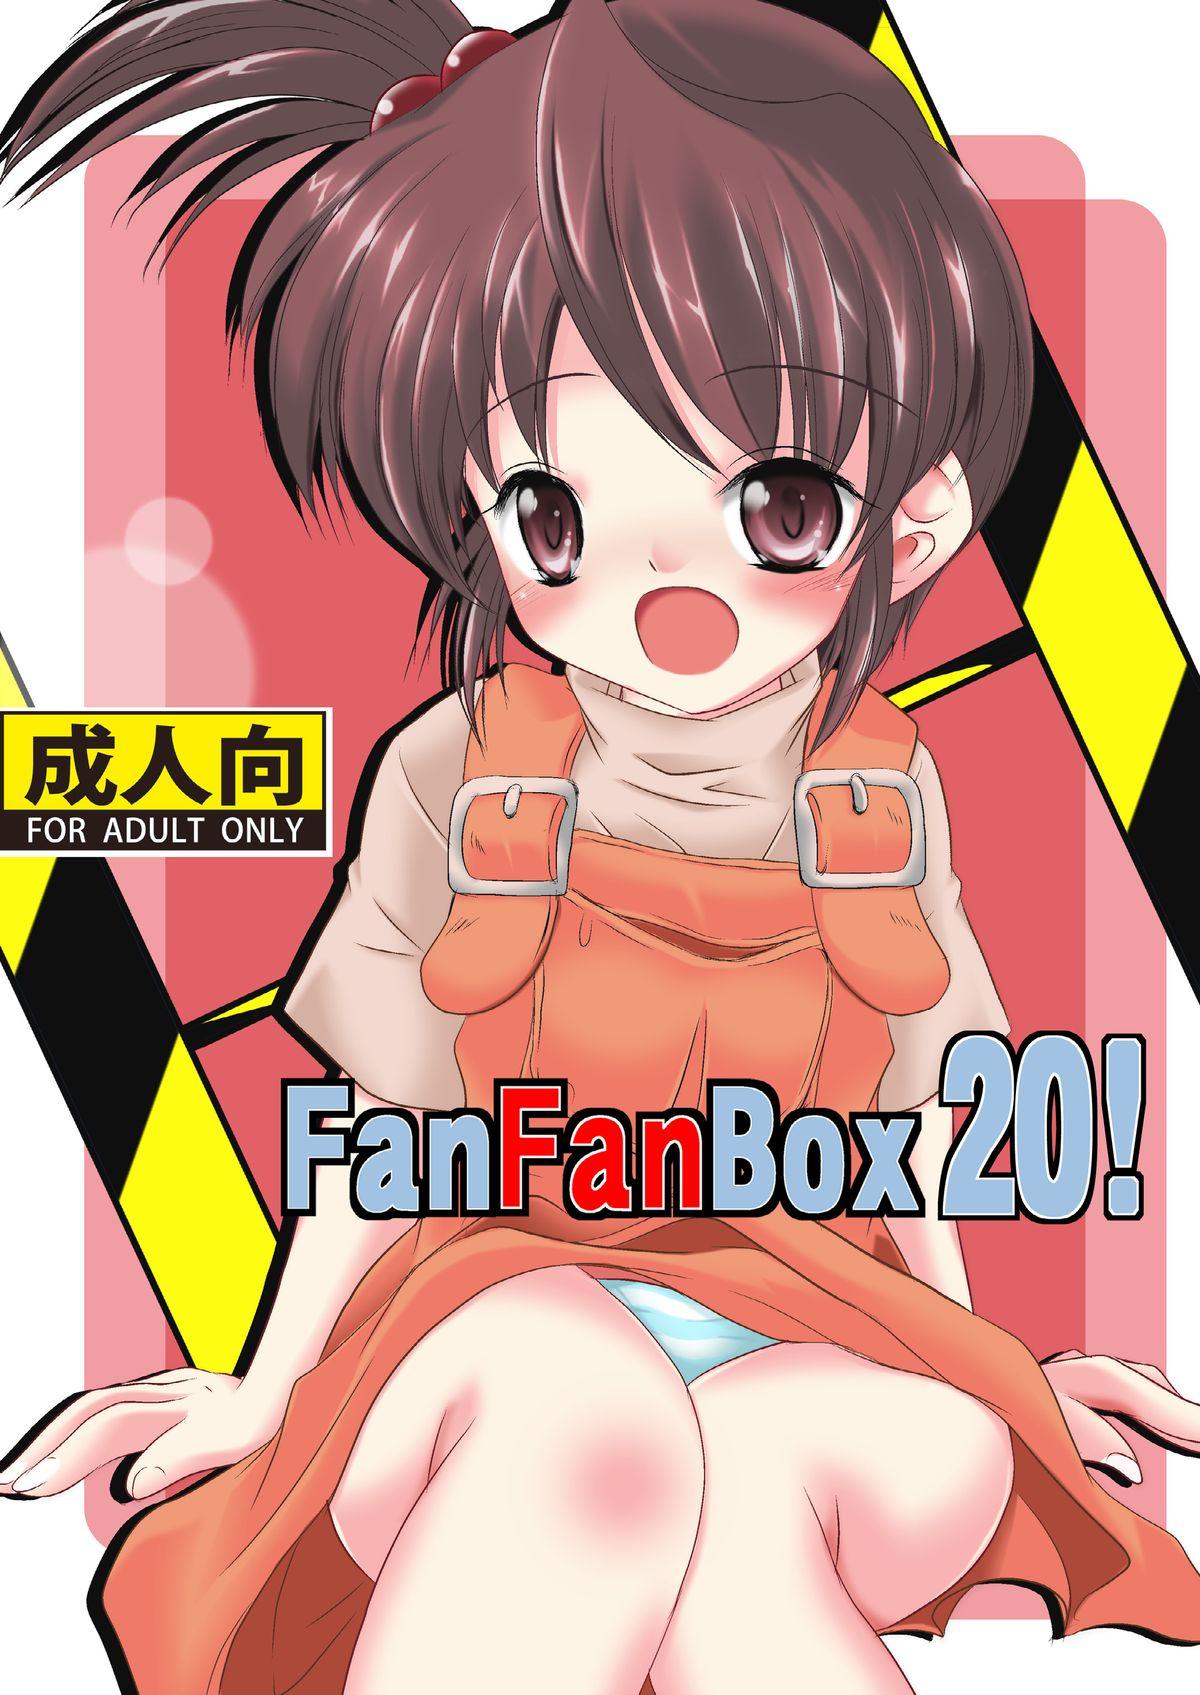 Pussy Play FanFanBox 20! - The melancholy of haruhi suzumiya 18 Porn - Picture 1